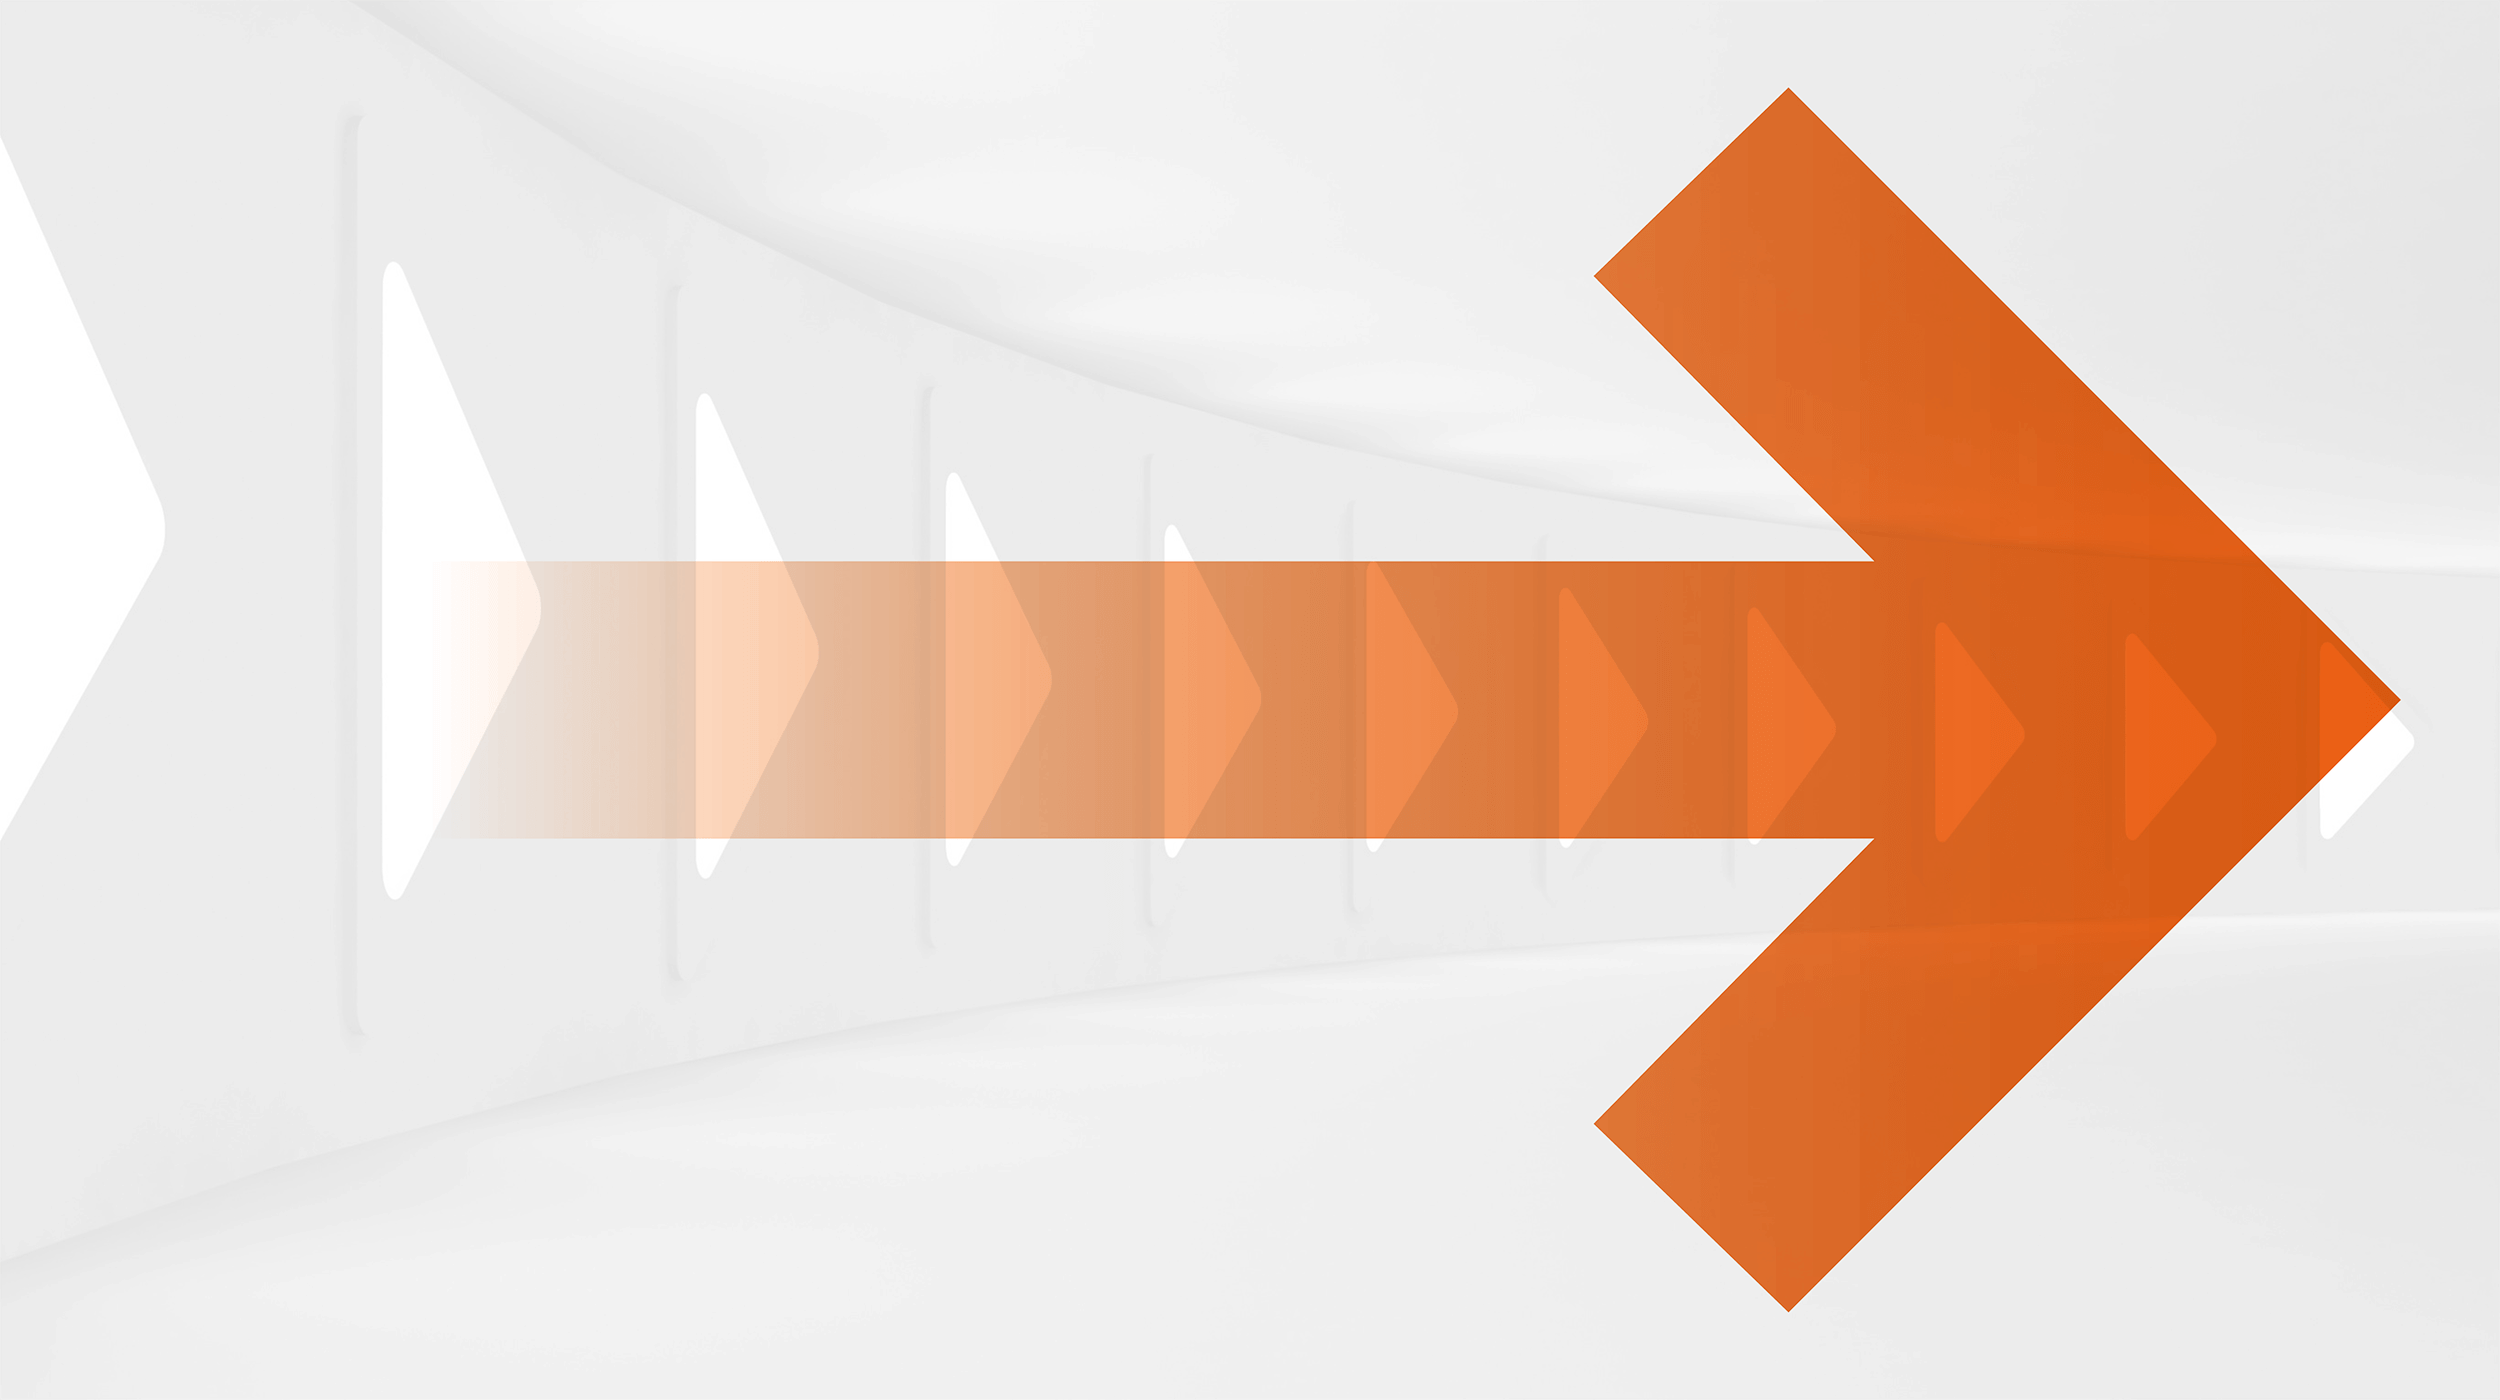 Large orange arrow pointing to the right, on a white and grey background